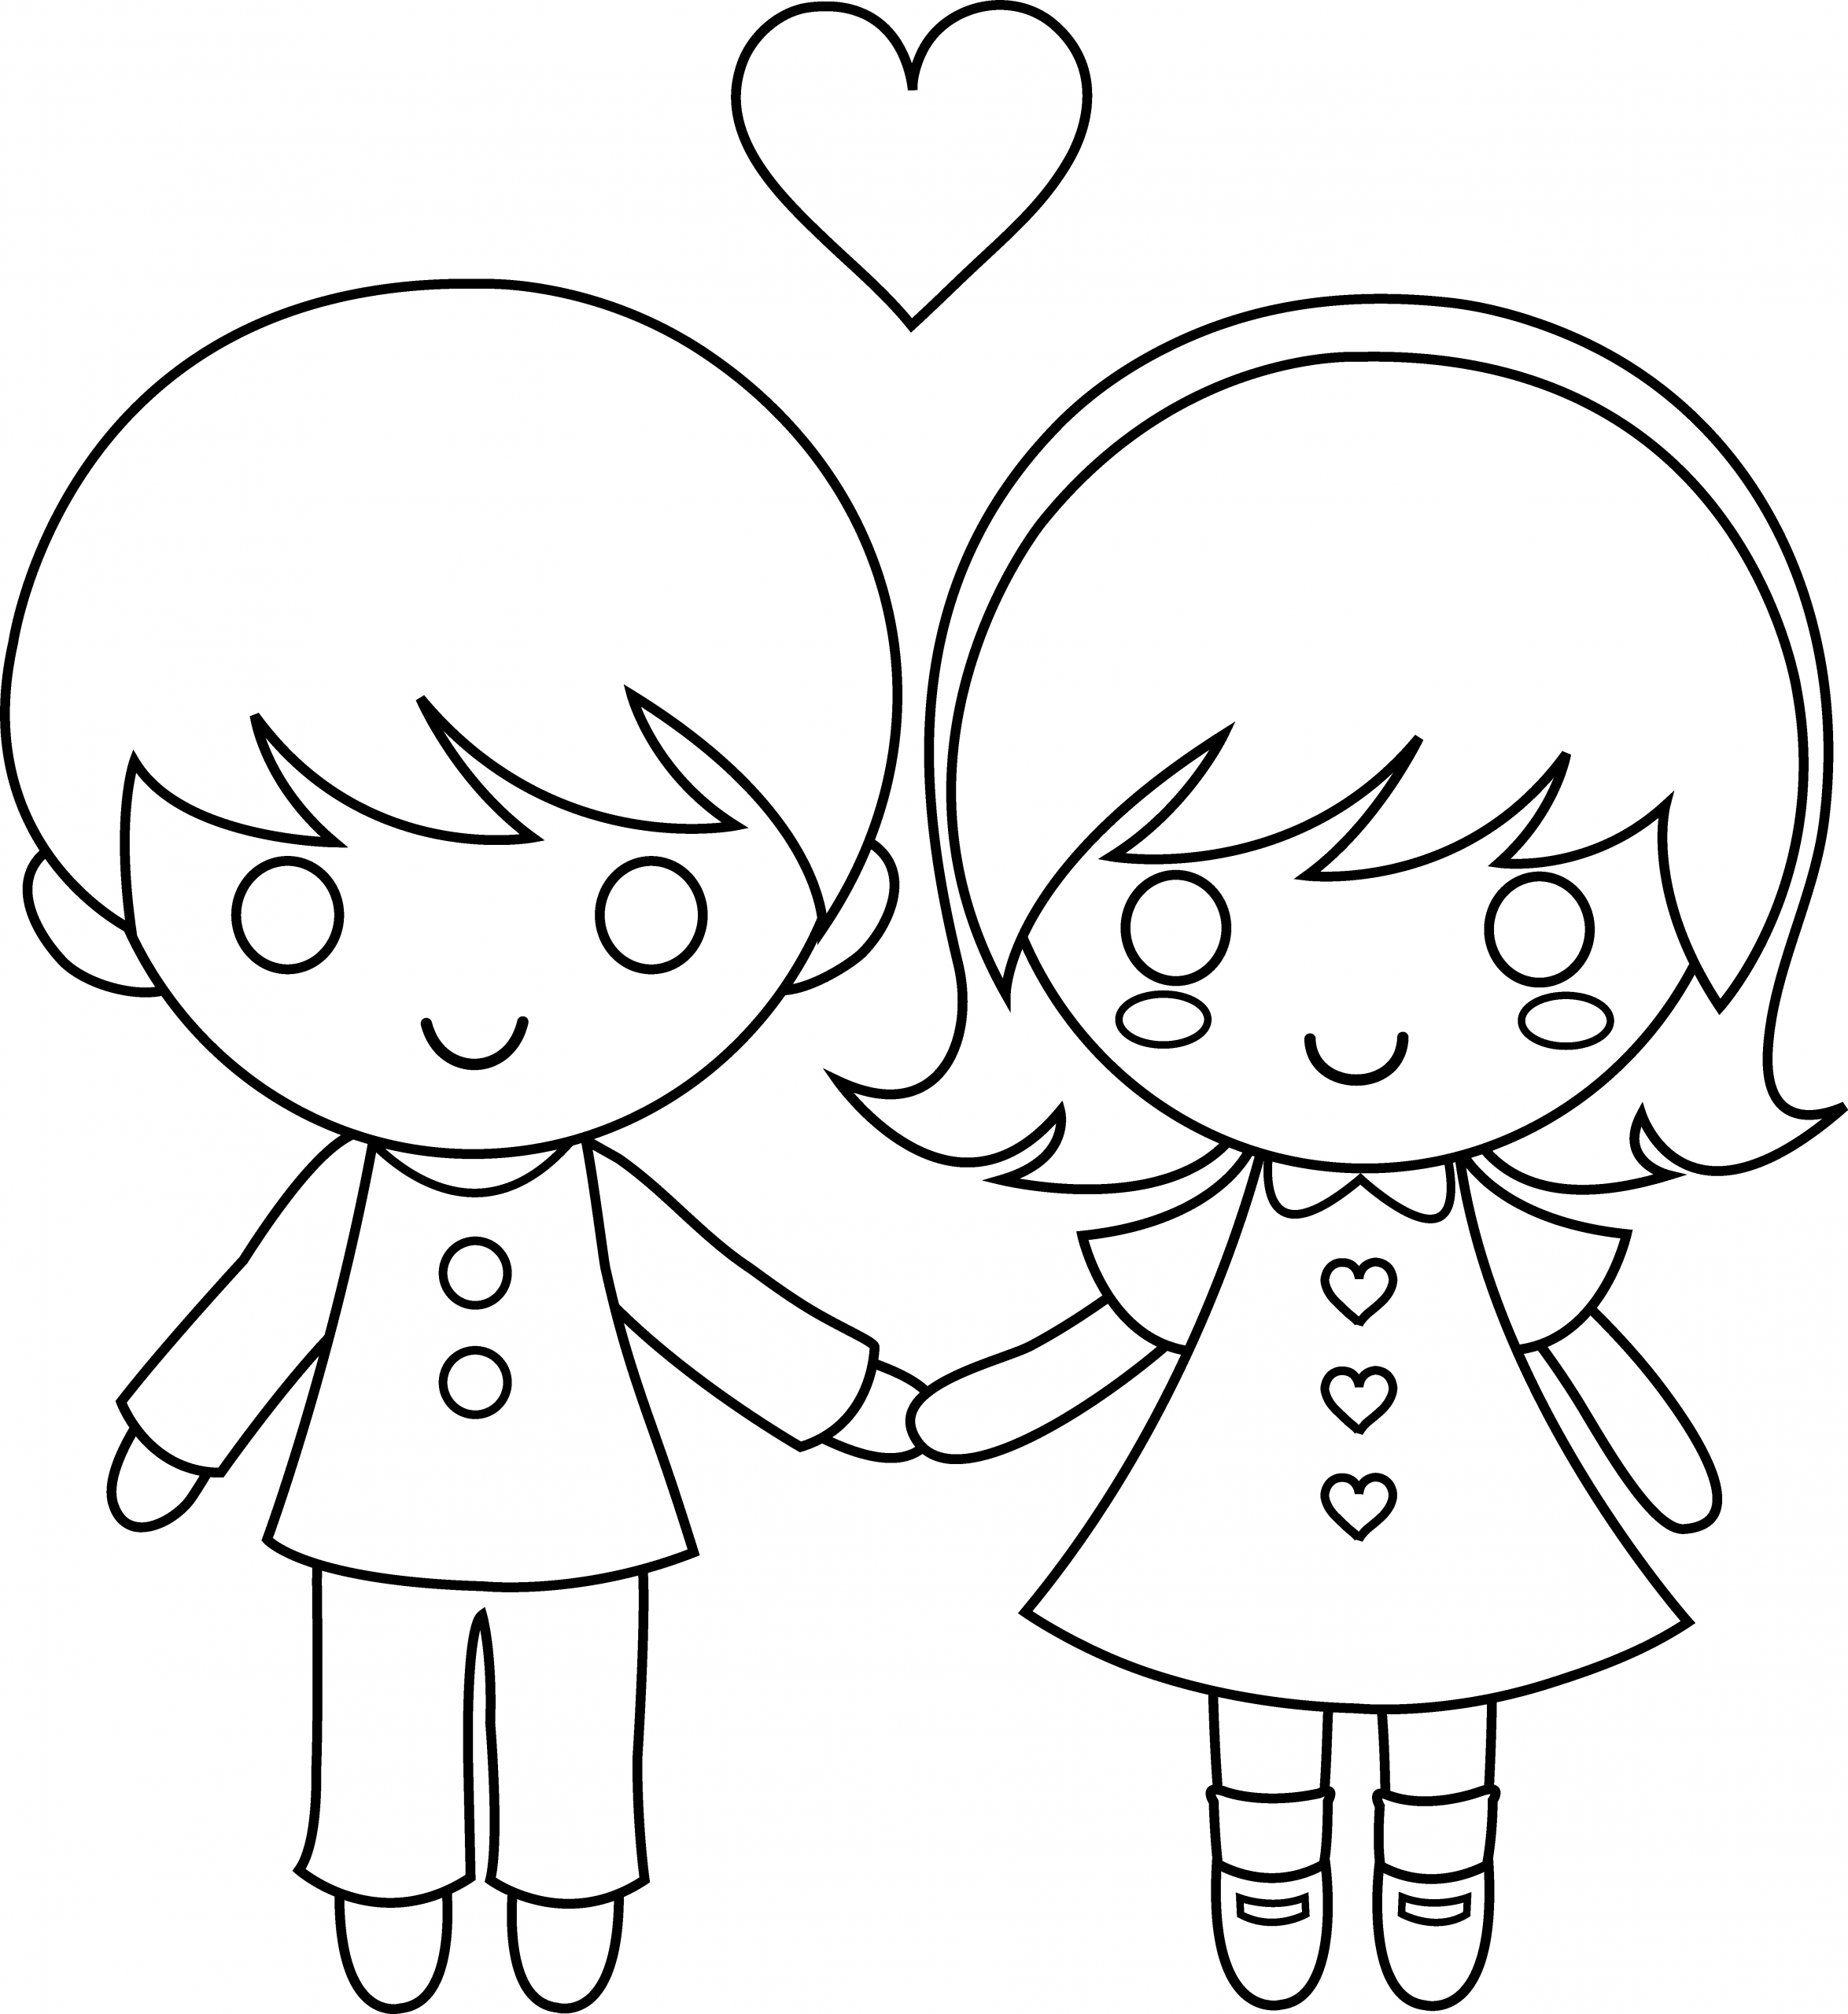 Boys And Girls Coloring Pages
 Colorable Valentines Day Kids Free Clip Art